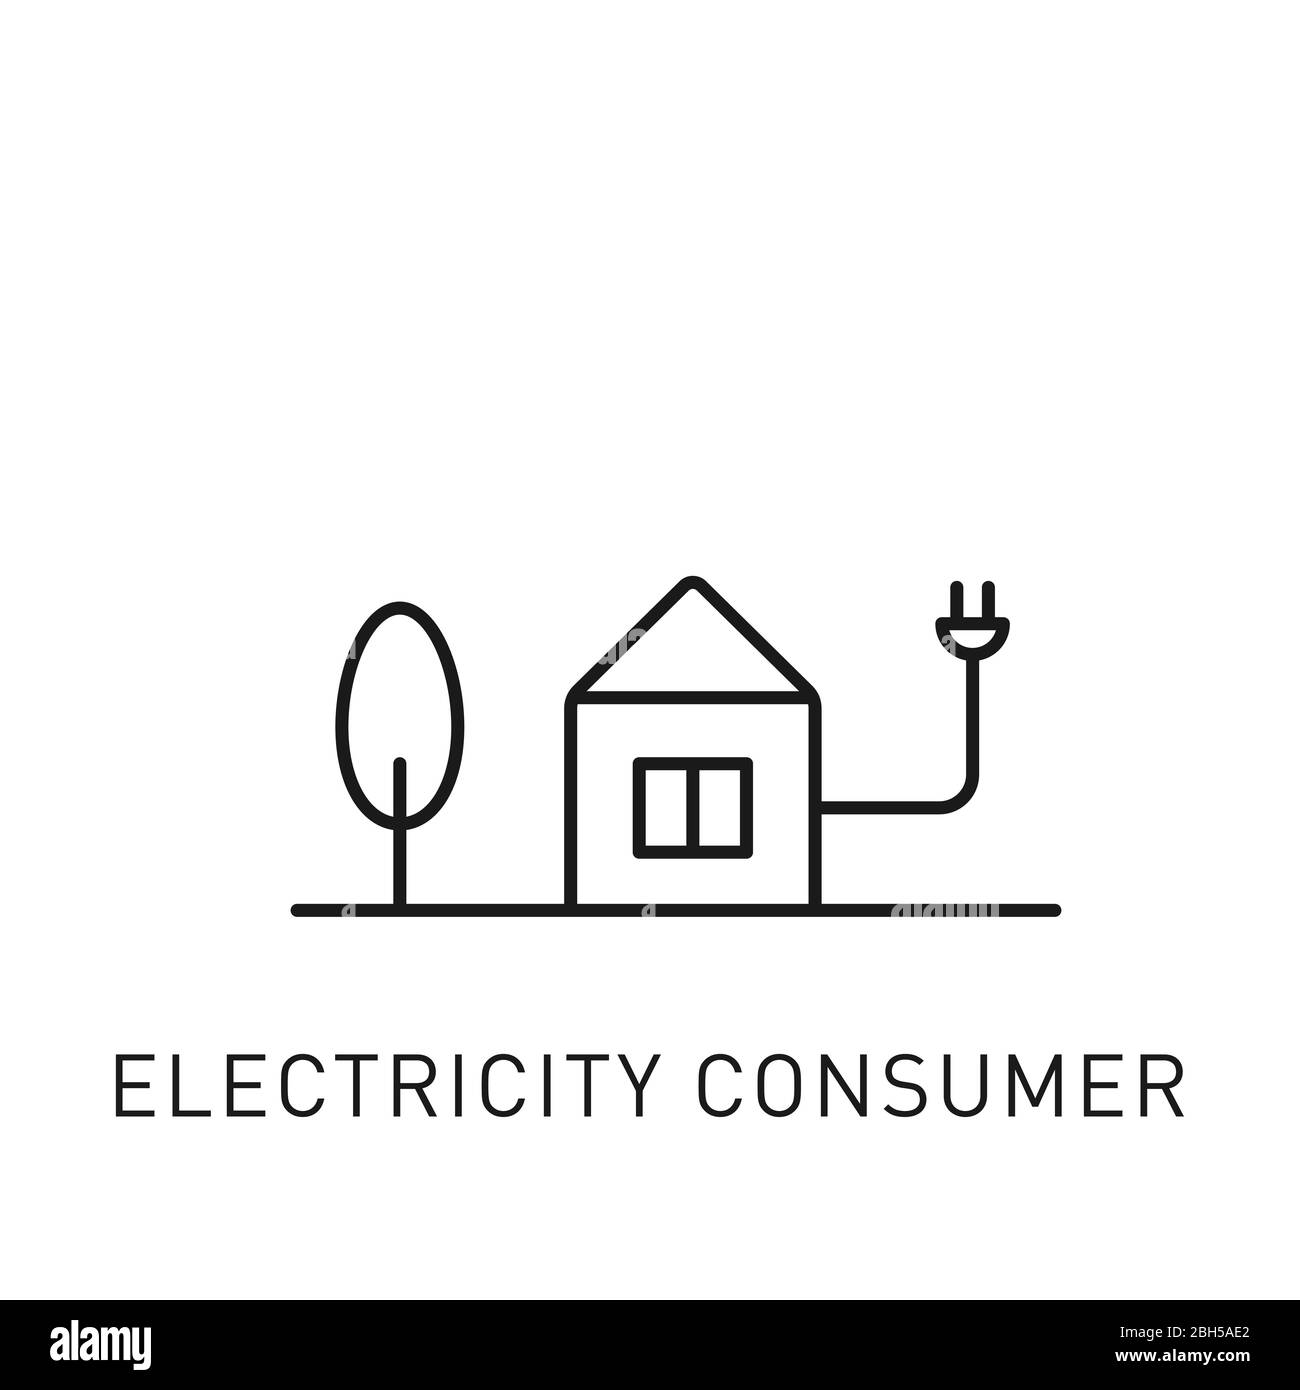 Electricity consumer thin line icon. Design element for renewable energy, green technology. Vector illustration. Stock Vector